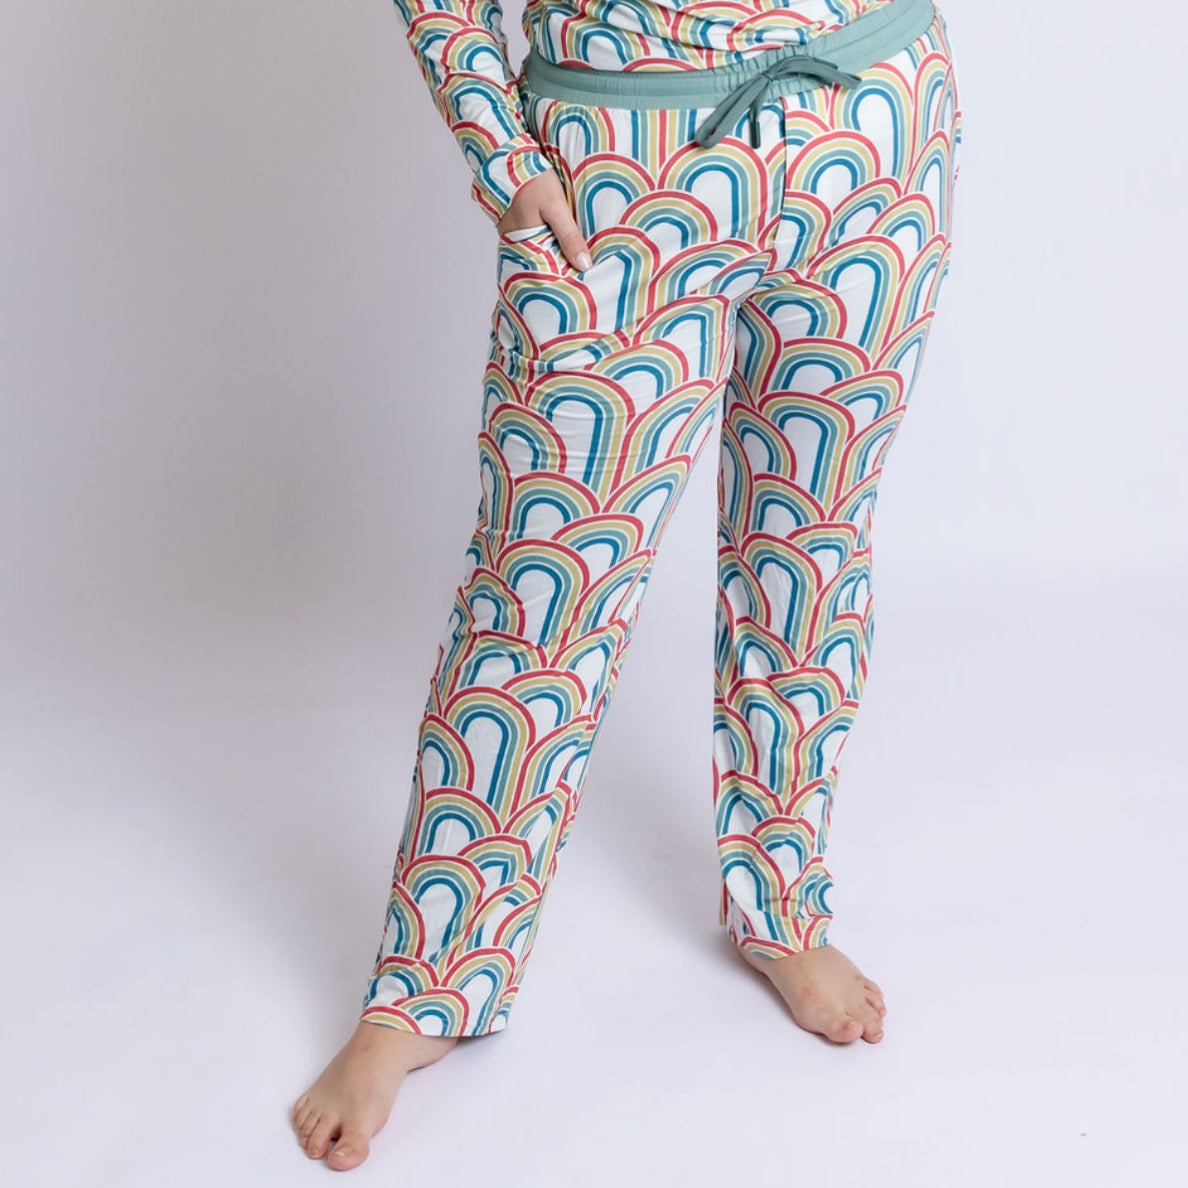 Rainbow Relaxed Two Piece Jammie Set